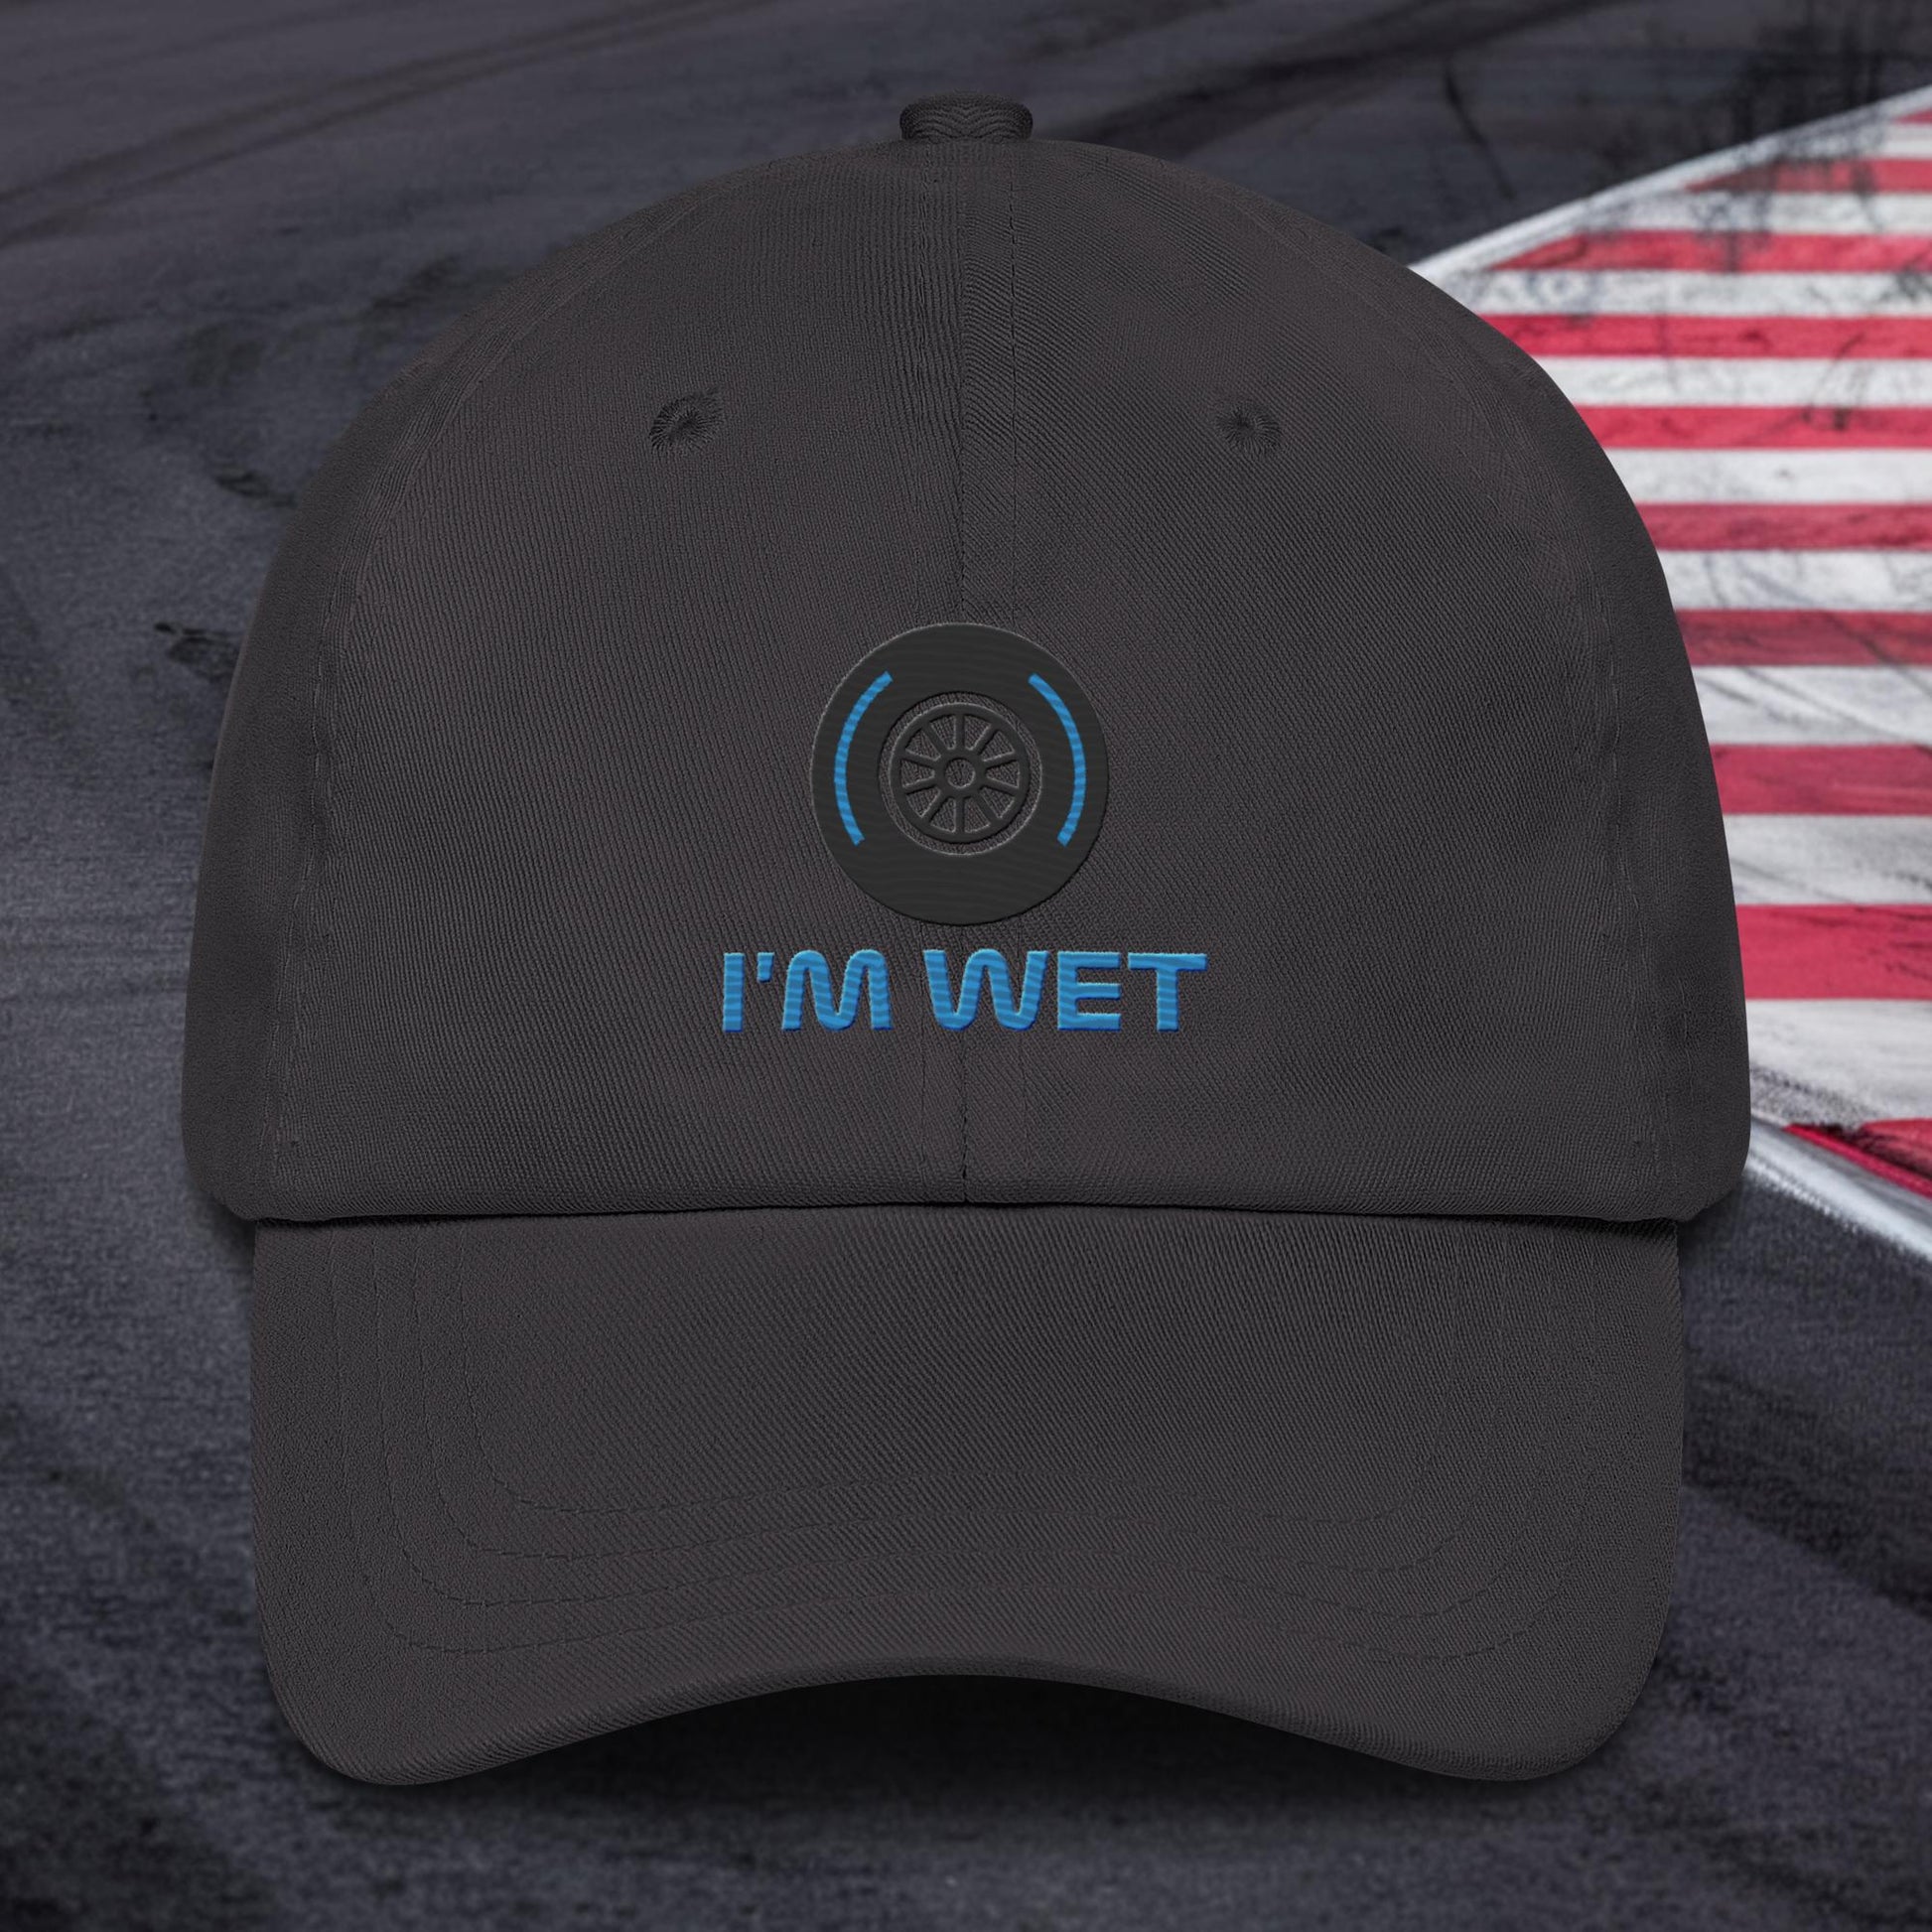 I'm Wet Tyres Funny F1 Dad hat Next Cult Brand